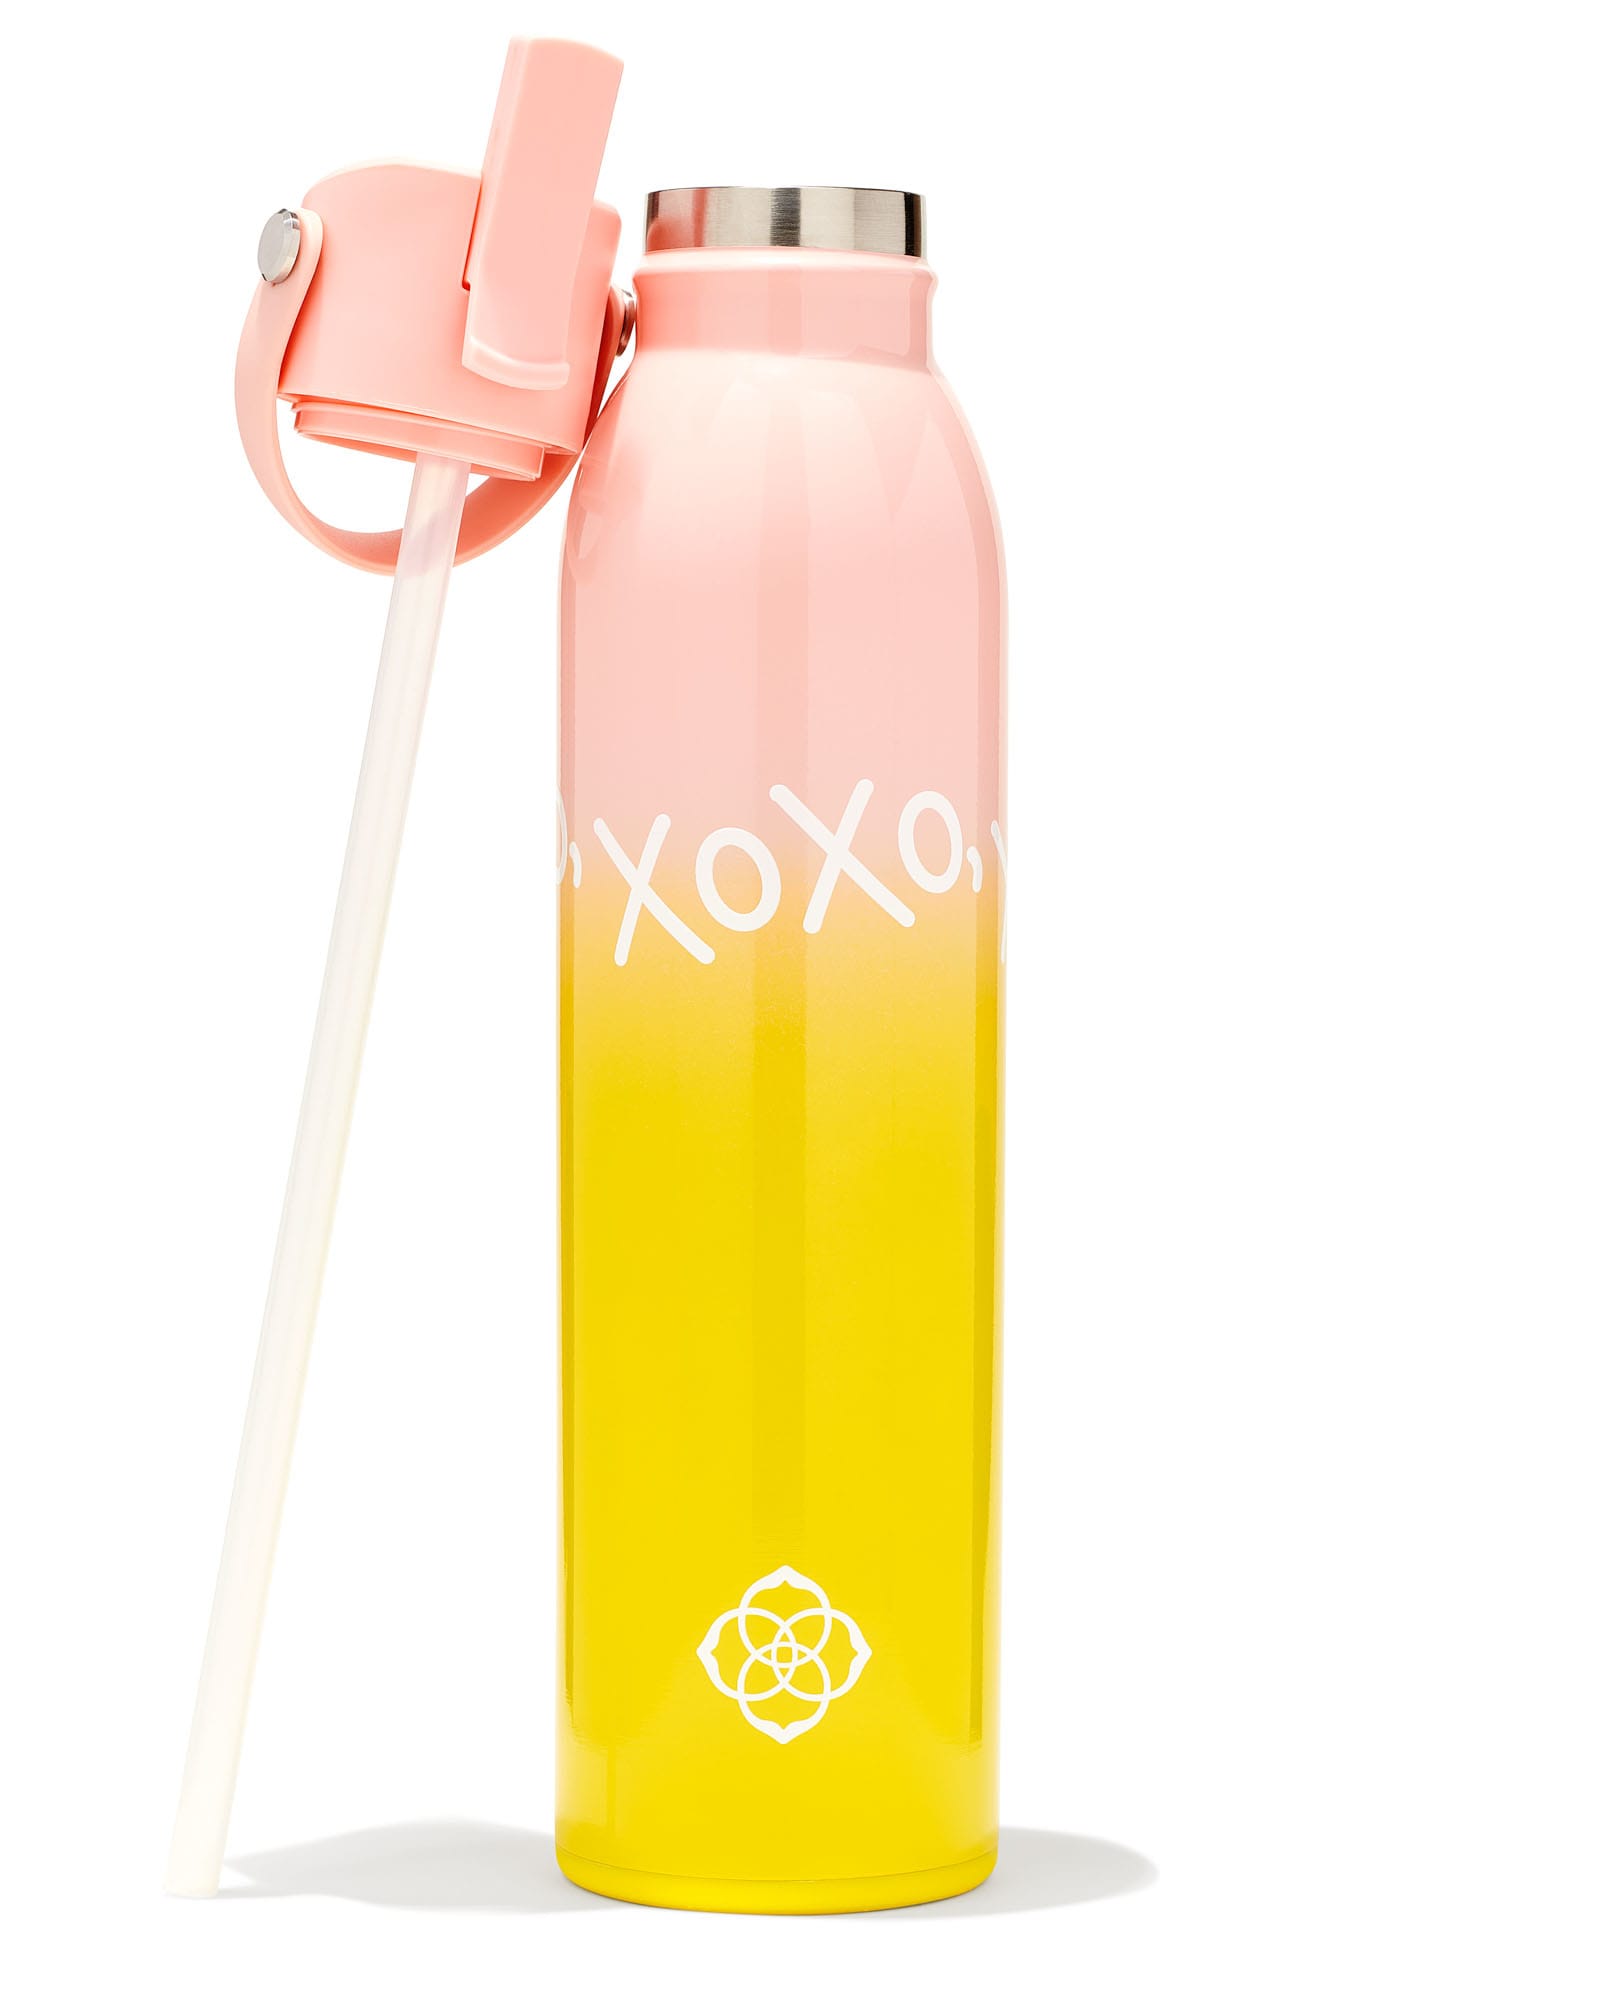 XOXO Water Bottle in Pink and Yellow Ombre